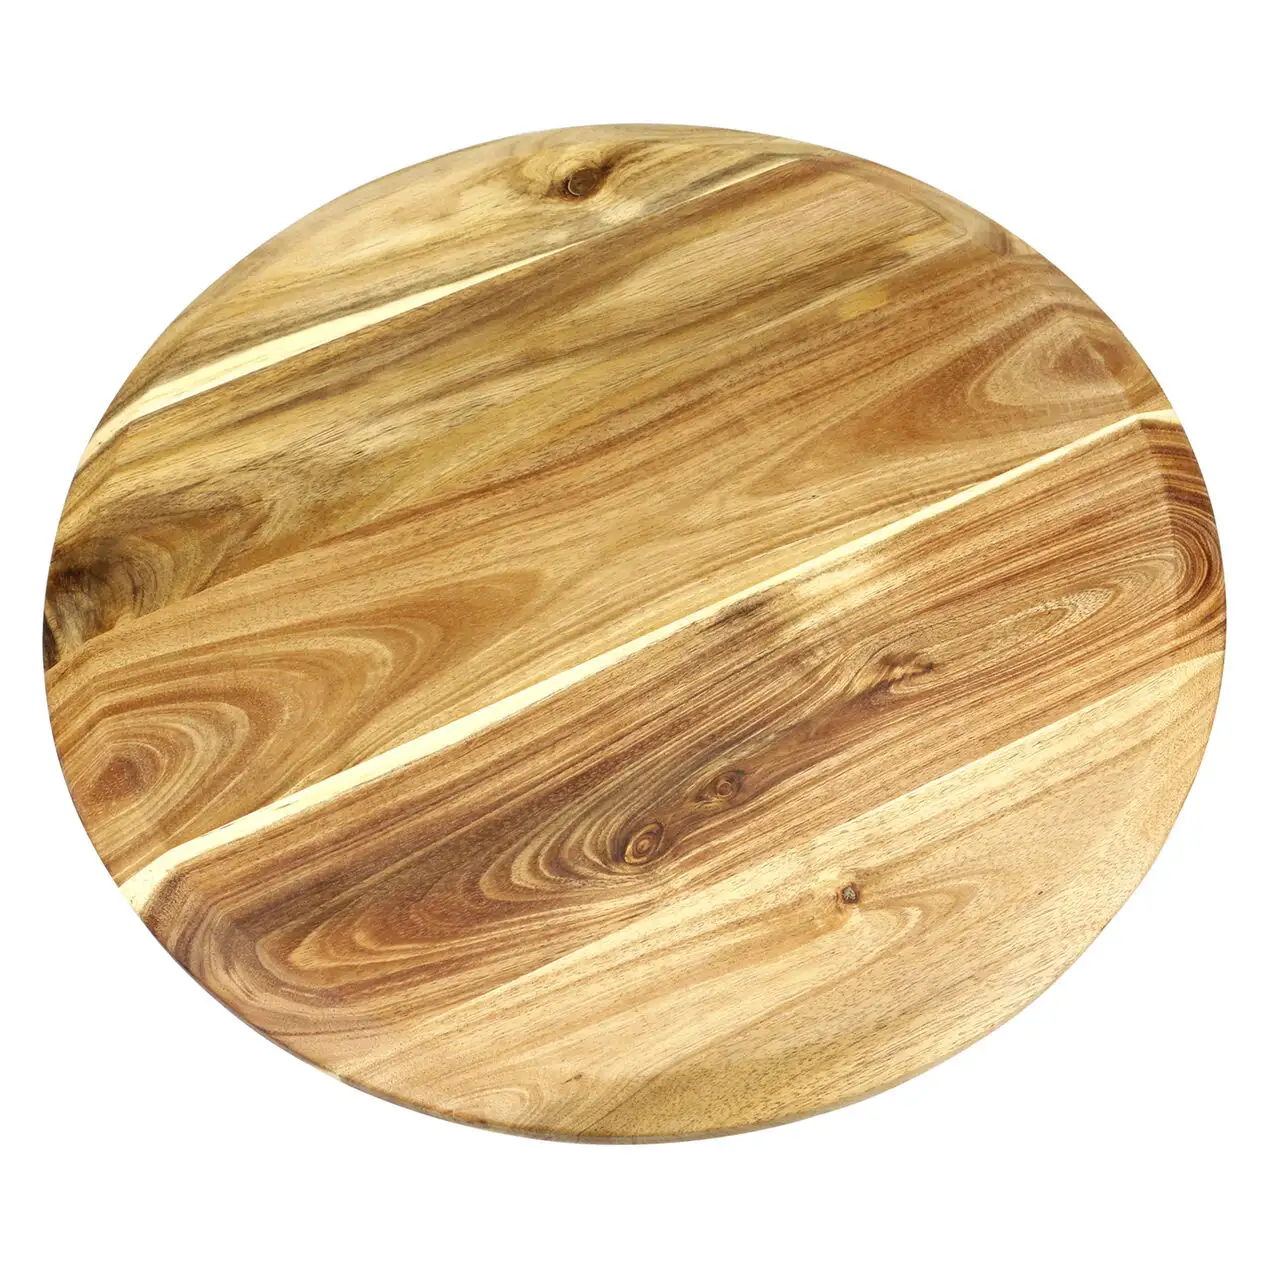 Wholesale High Quality Round Normal Acacia Wood Lazy Susan Turntable Kitchen